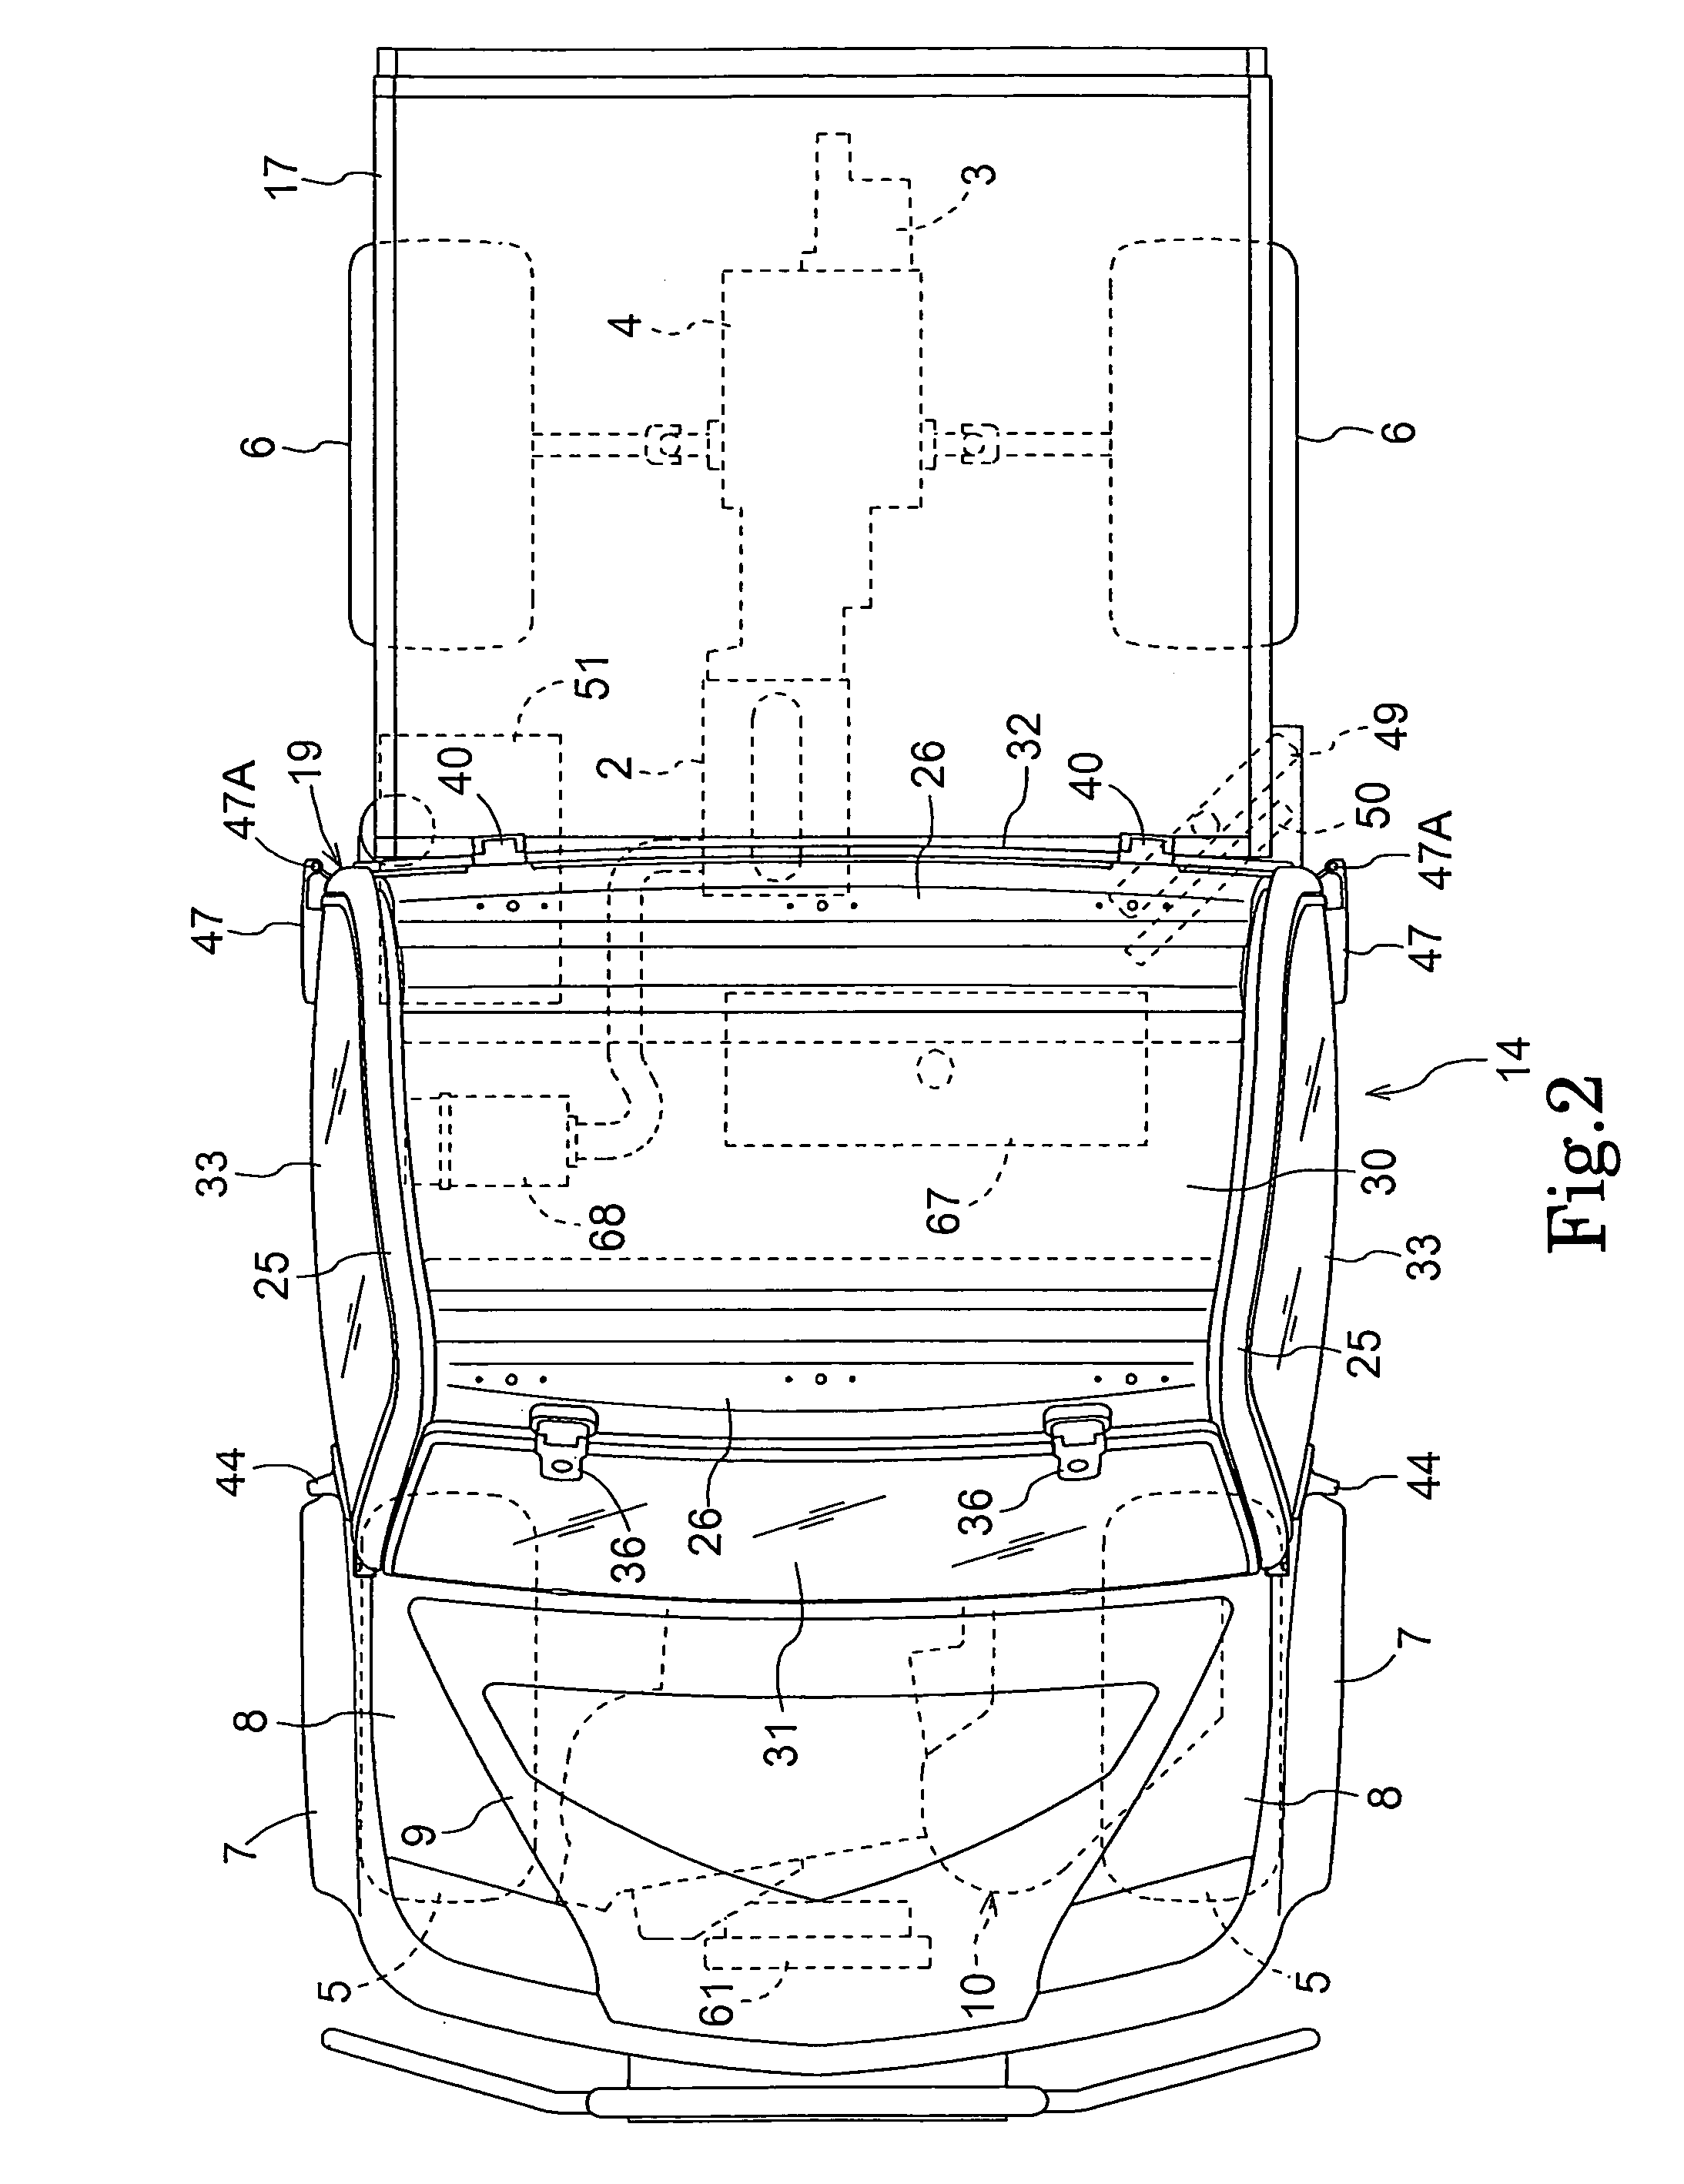 Air conditioning device for work vehicle